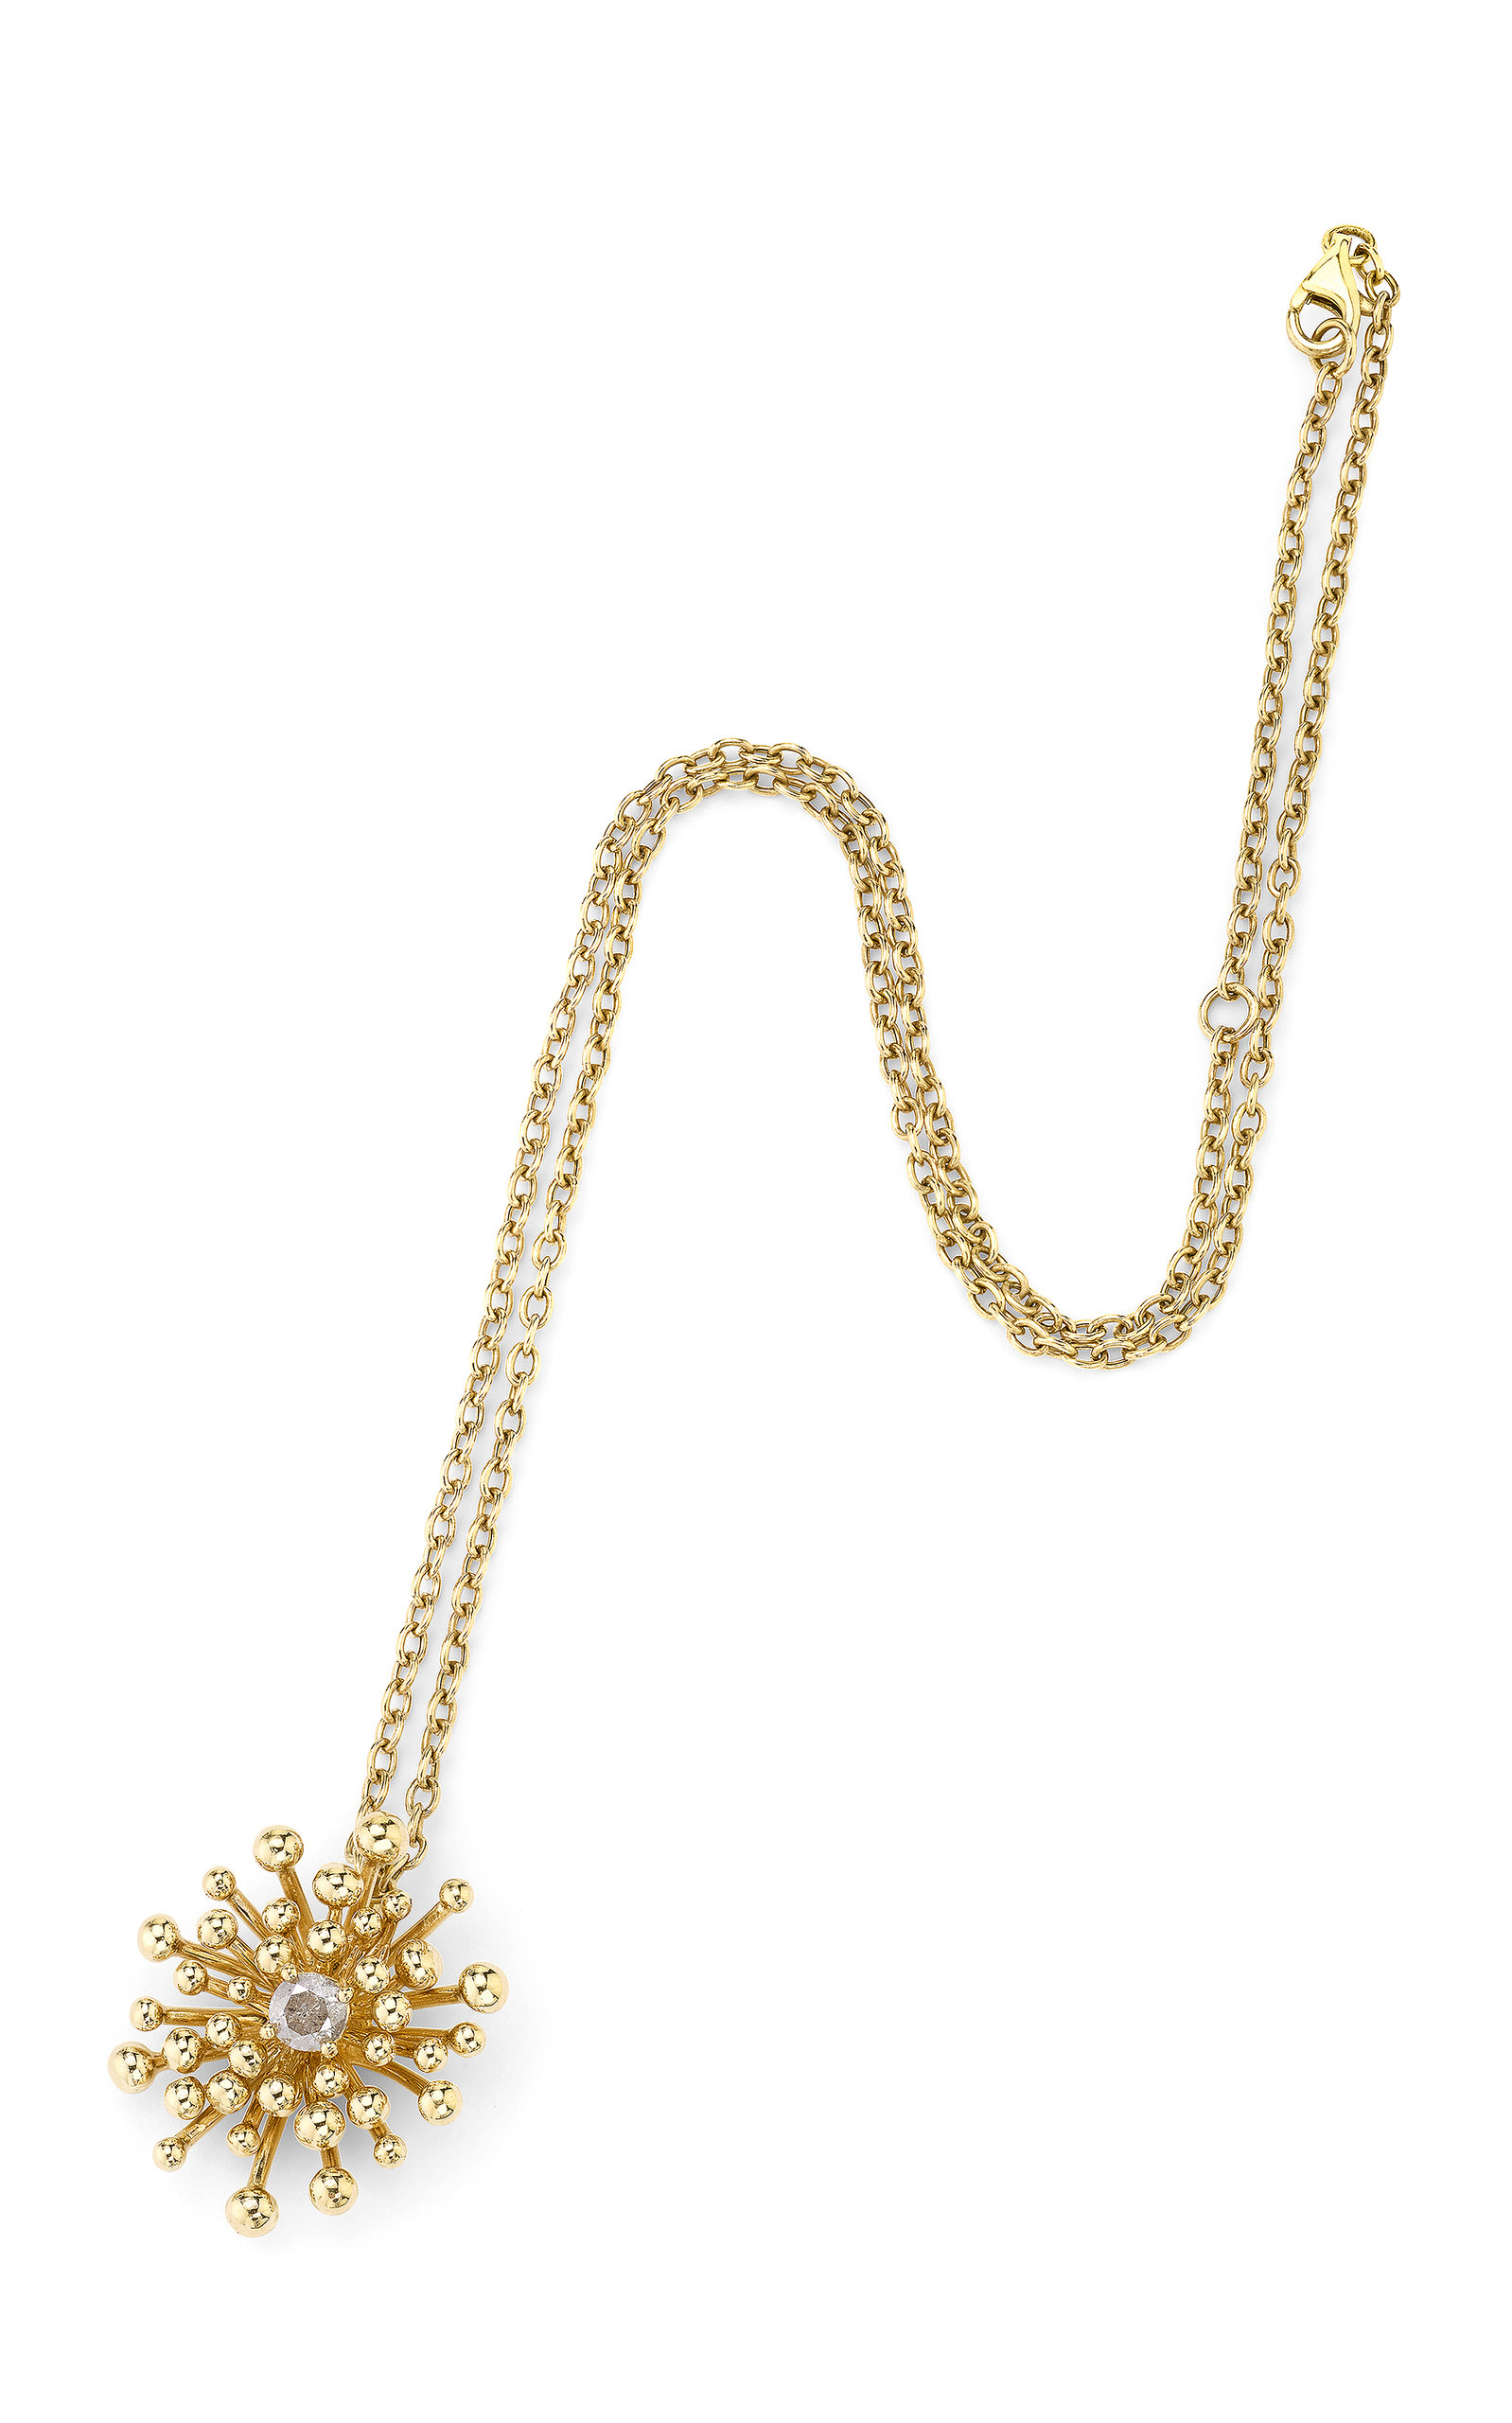 18K Yellow Gold Nocturne Diamond Necklace